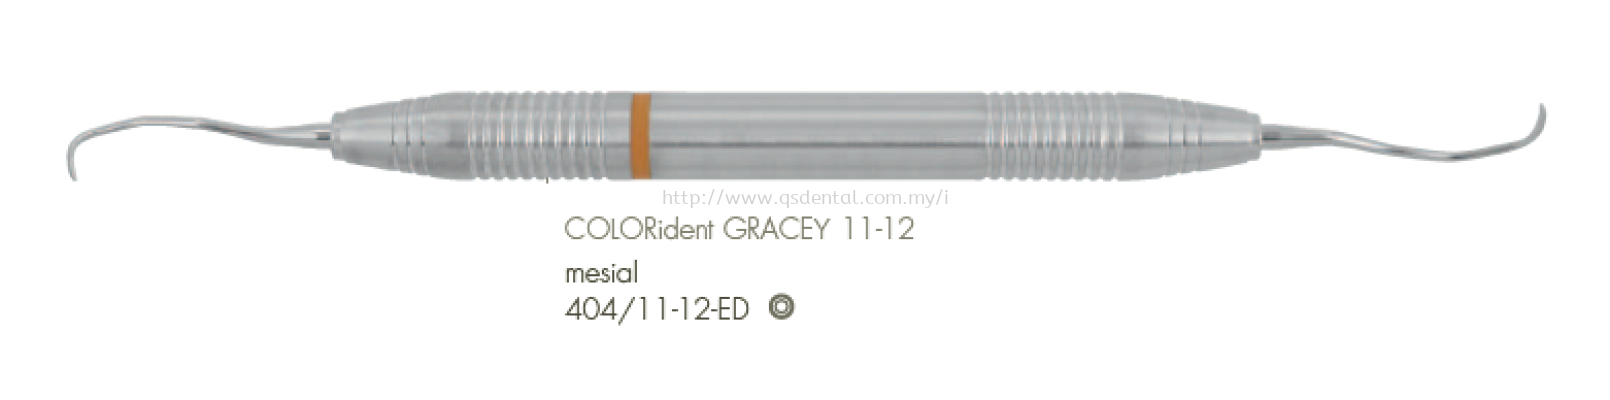 404/11-12-ED 10mm Handle With COLORident Distal No.11-12 Gracey Curettes